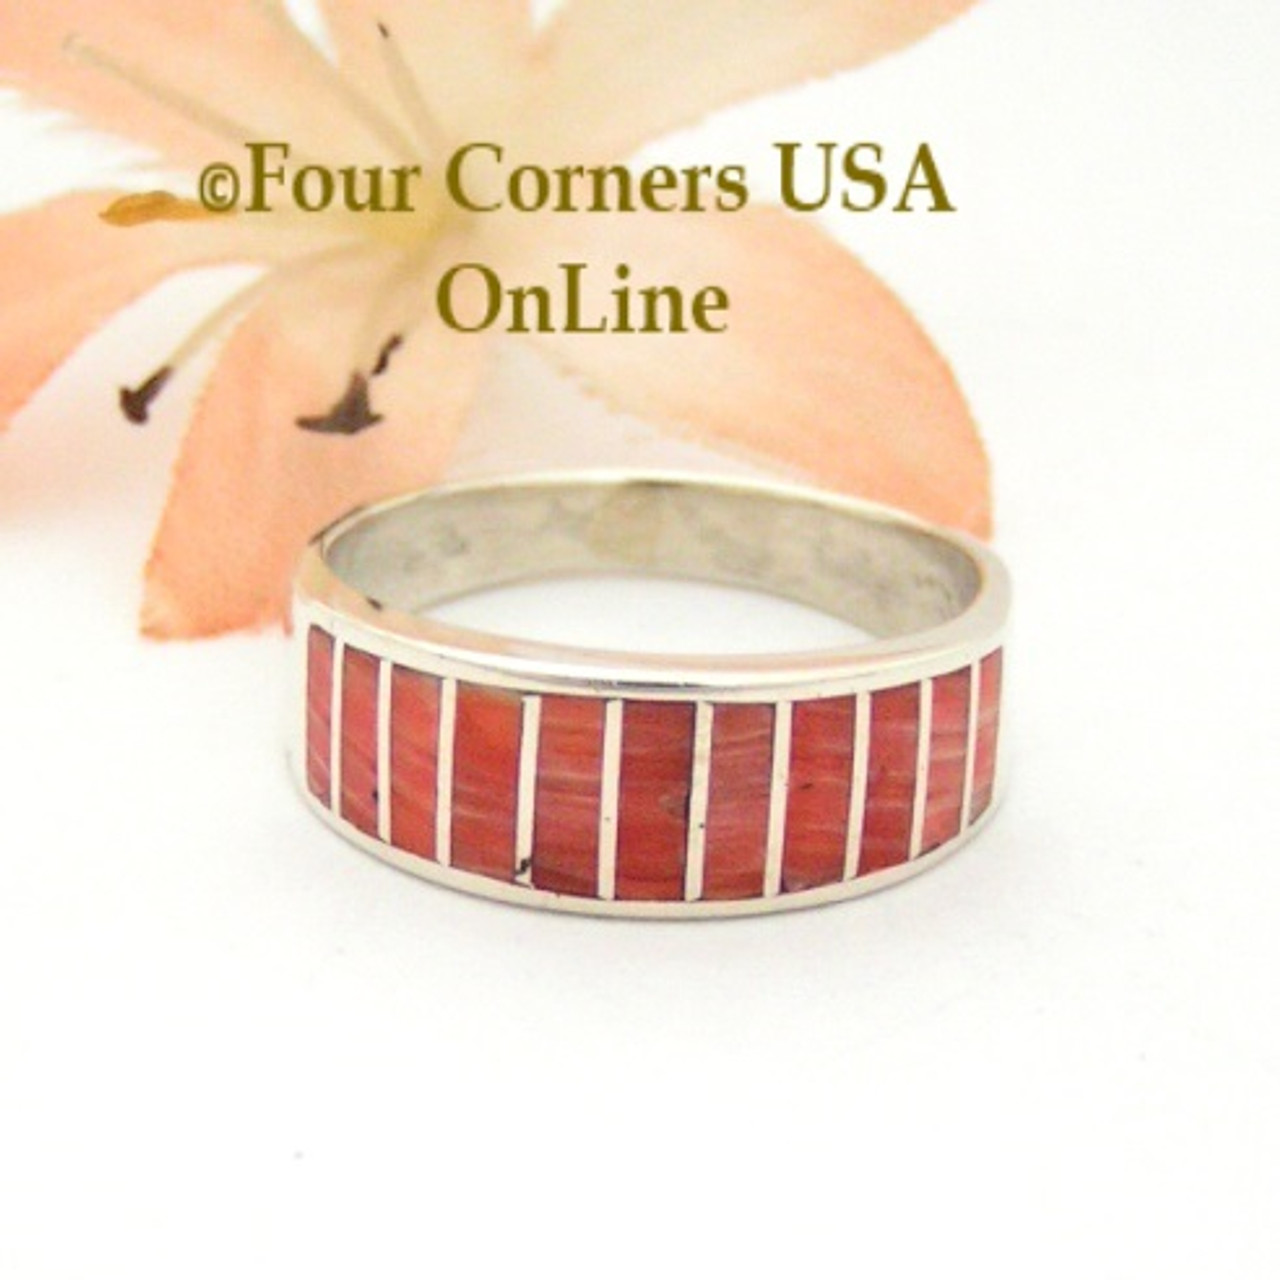 Size 7 1/2 Red Spiny Oyster Inlay Band Ring Navajo Ella Cowboy WB-1528  Special Buy Final Sale - Four Corners USA Online